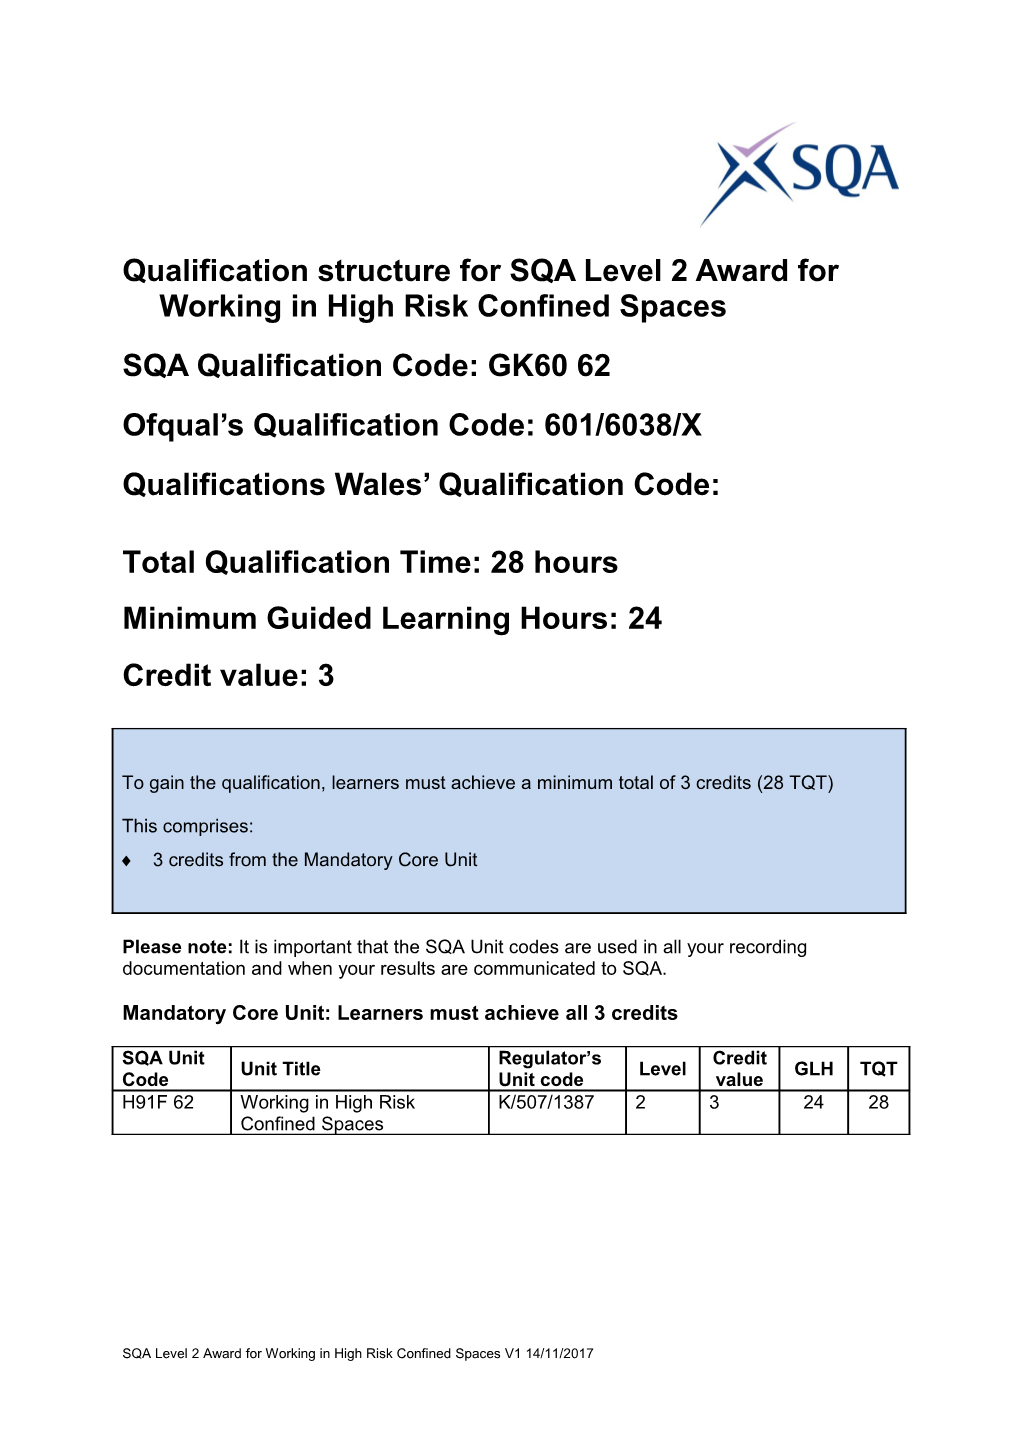 Qualification Structure for SQA Level 2 Award for Working in High Risk Confined Spaces